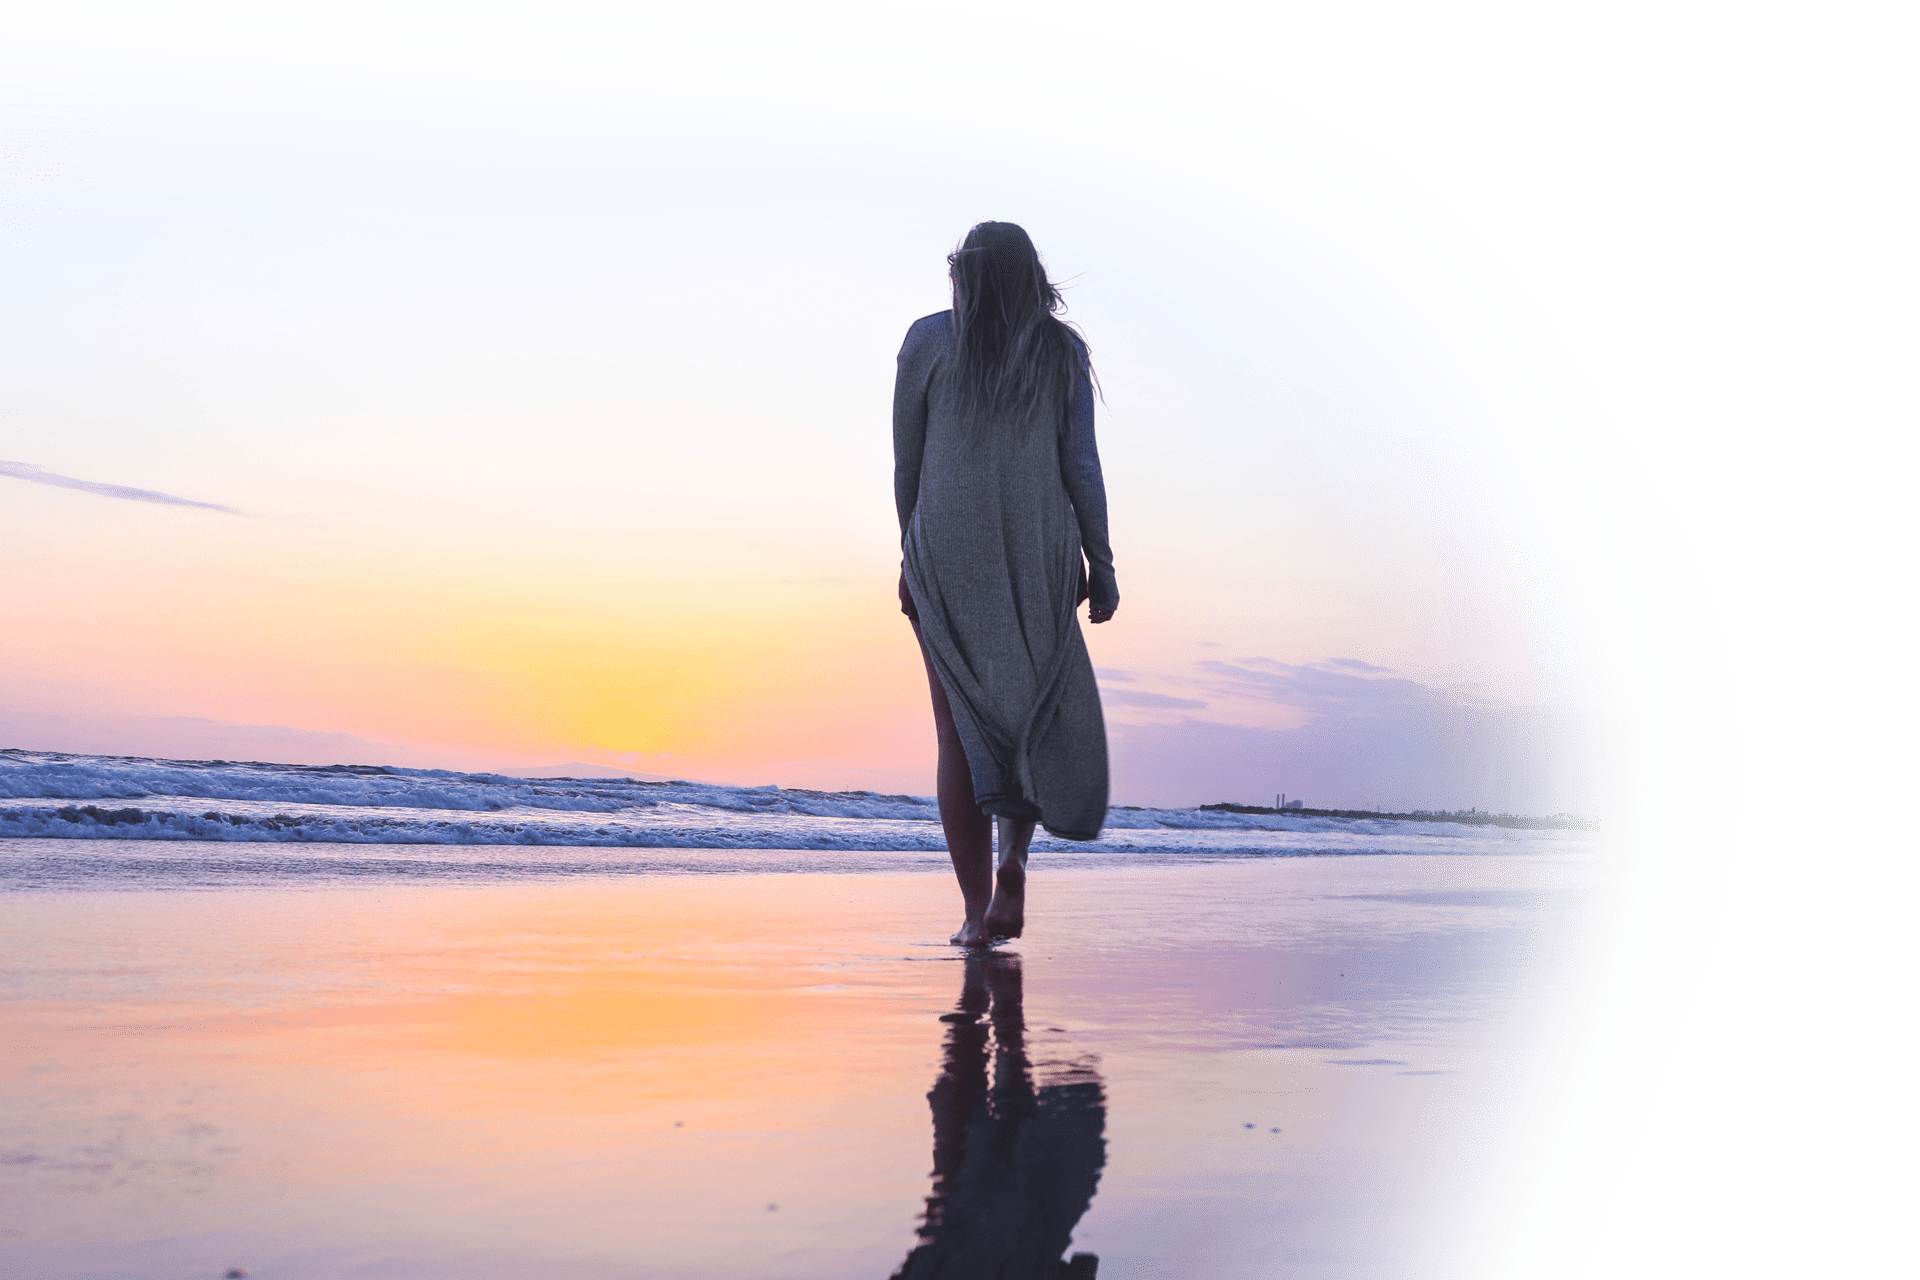 Image of woman walking on a beach during a sunset